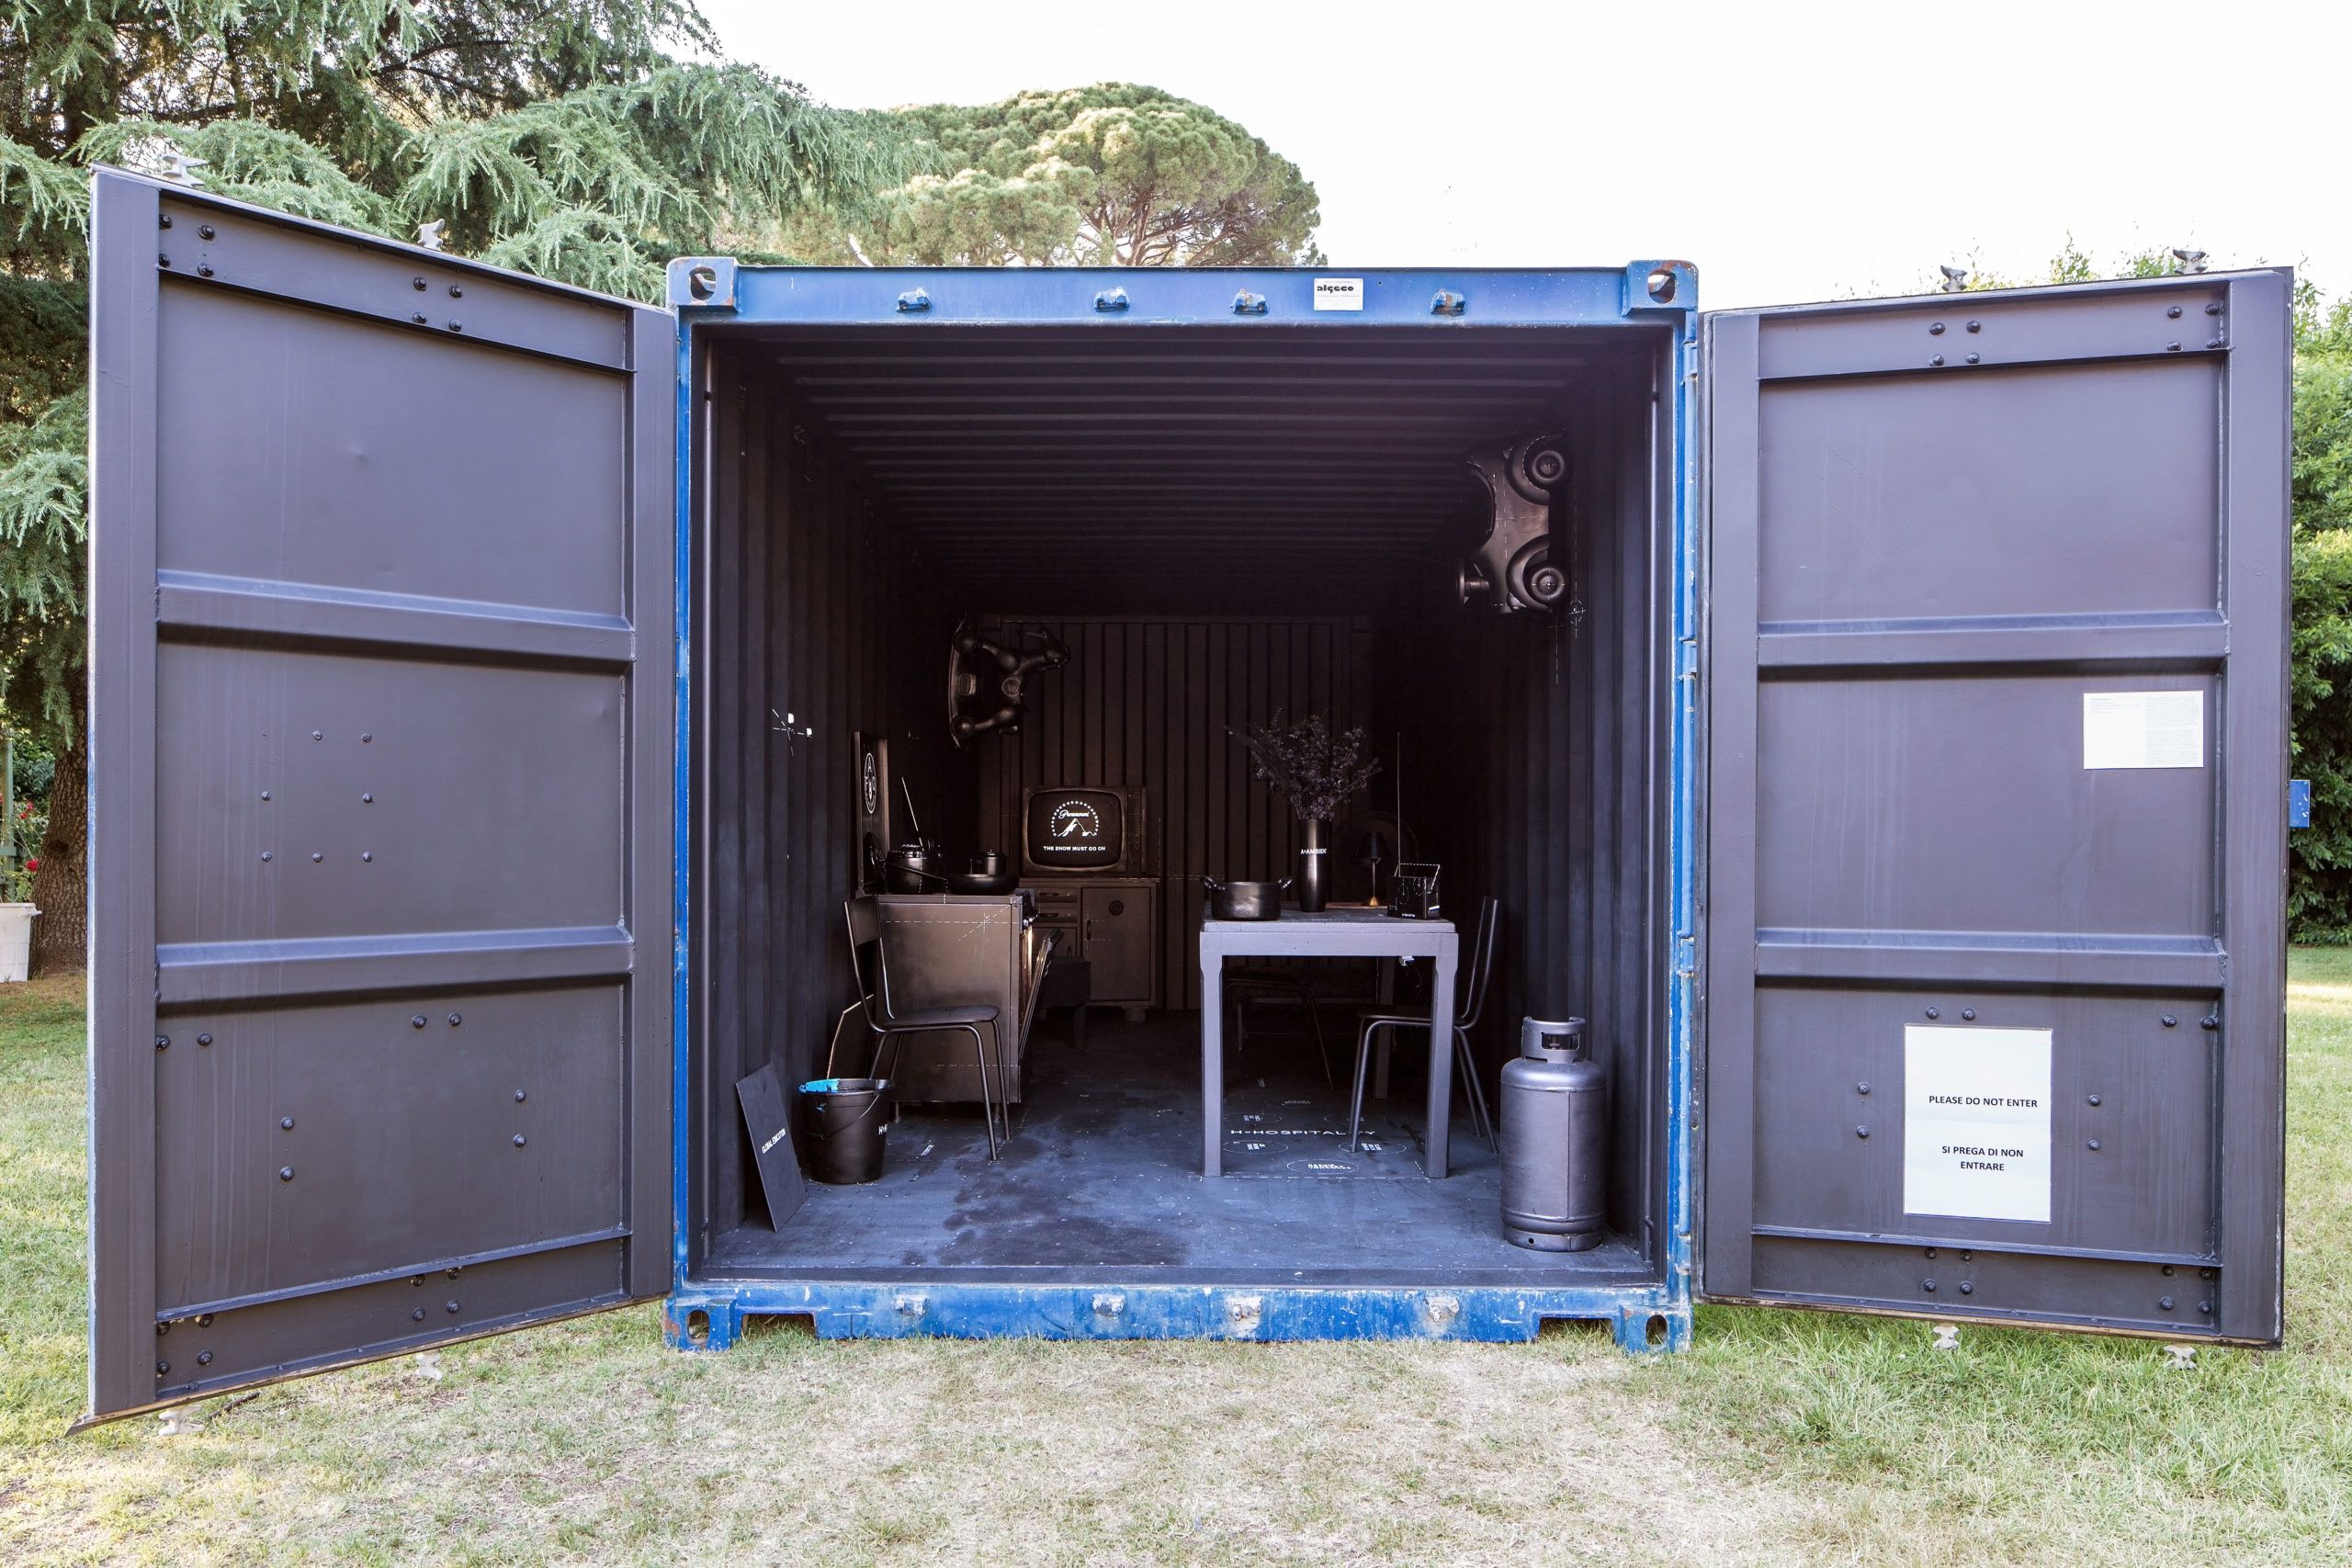 EMIGRATION MADE, 2015 Installation view at American Academy in Rome Container, software, dolby stereo S.7.0, painting, blackboard and acrylic, 600 x 300 cm © Courtesy de l'artiste